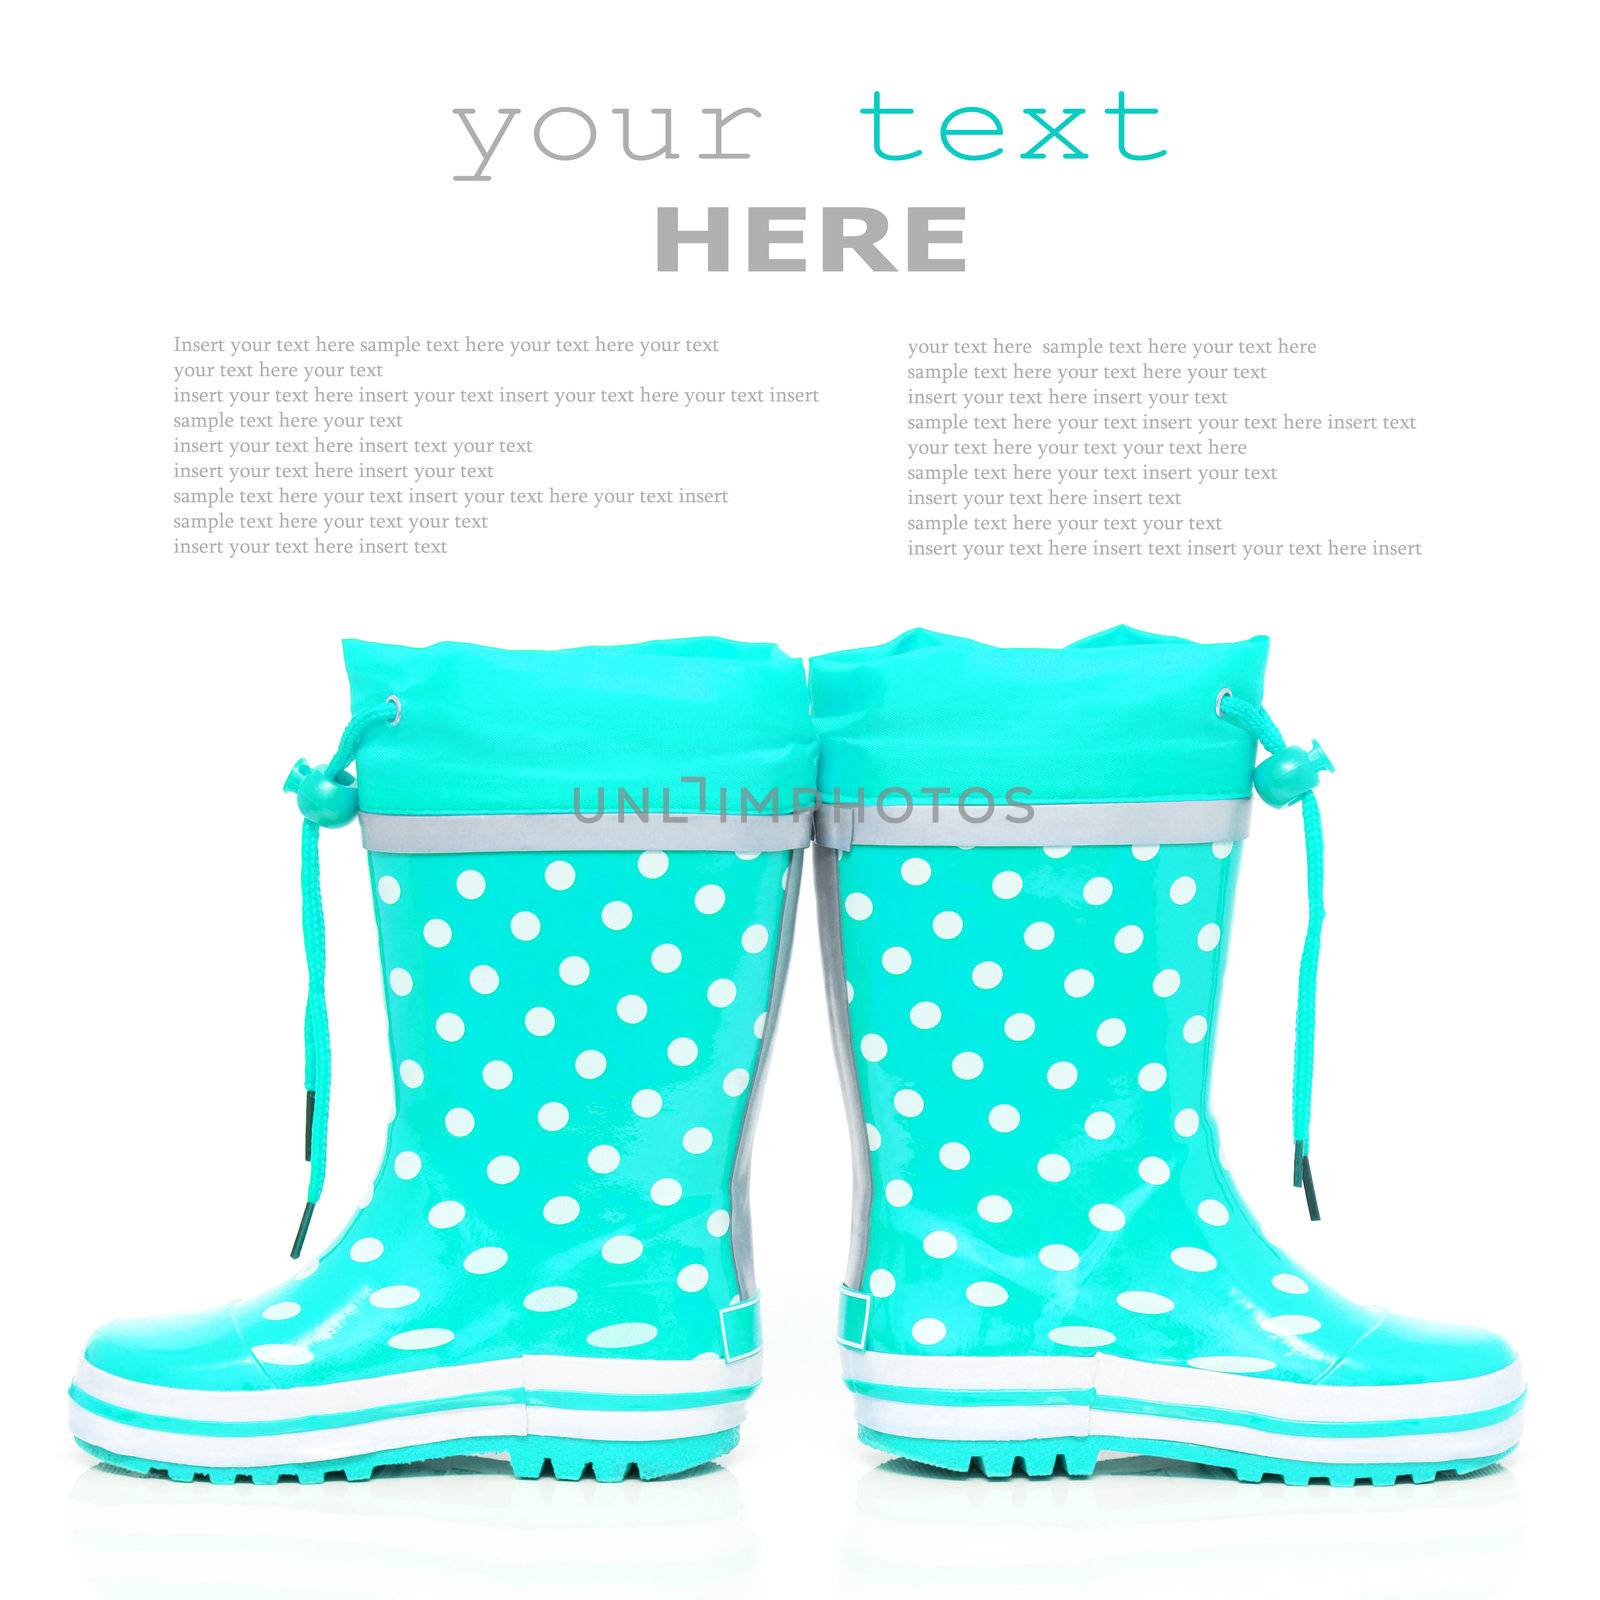 Cyan rubber boots for kids isolated on white background (with sample text)